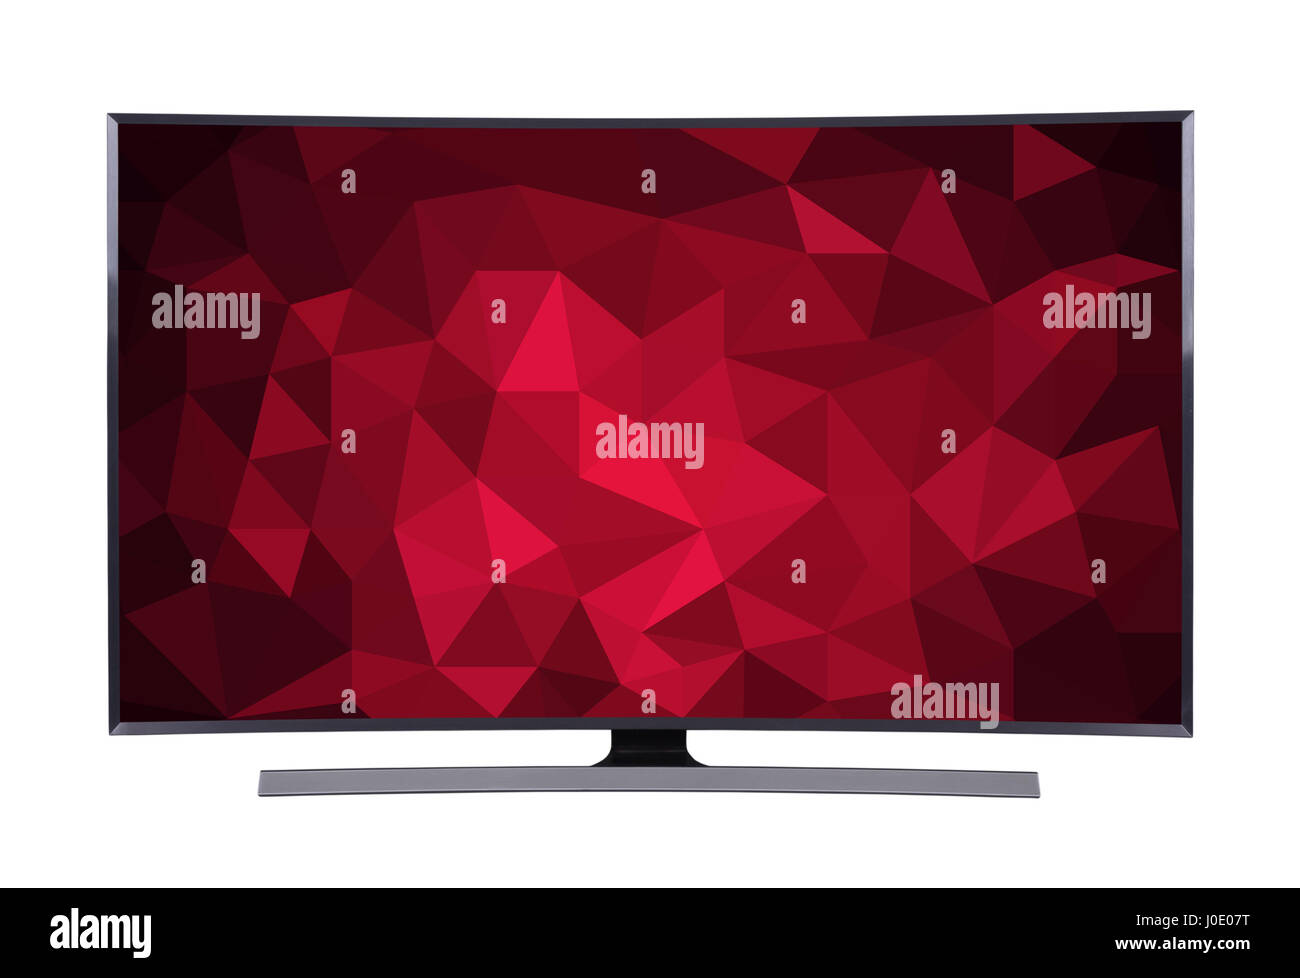 Tv screen texture Cut Out Stock Images & Pictures - Alamy